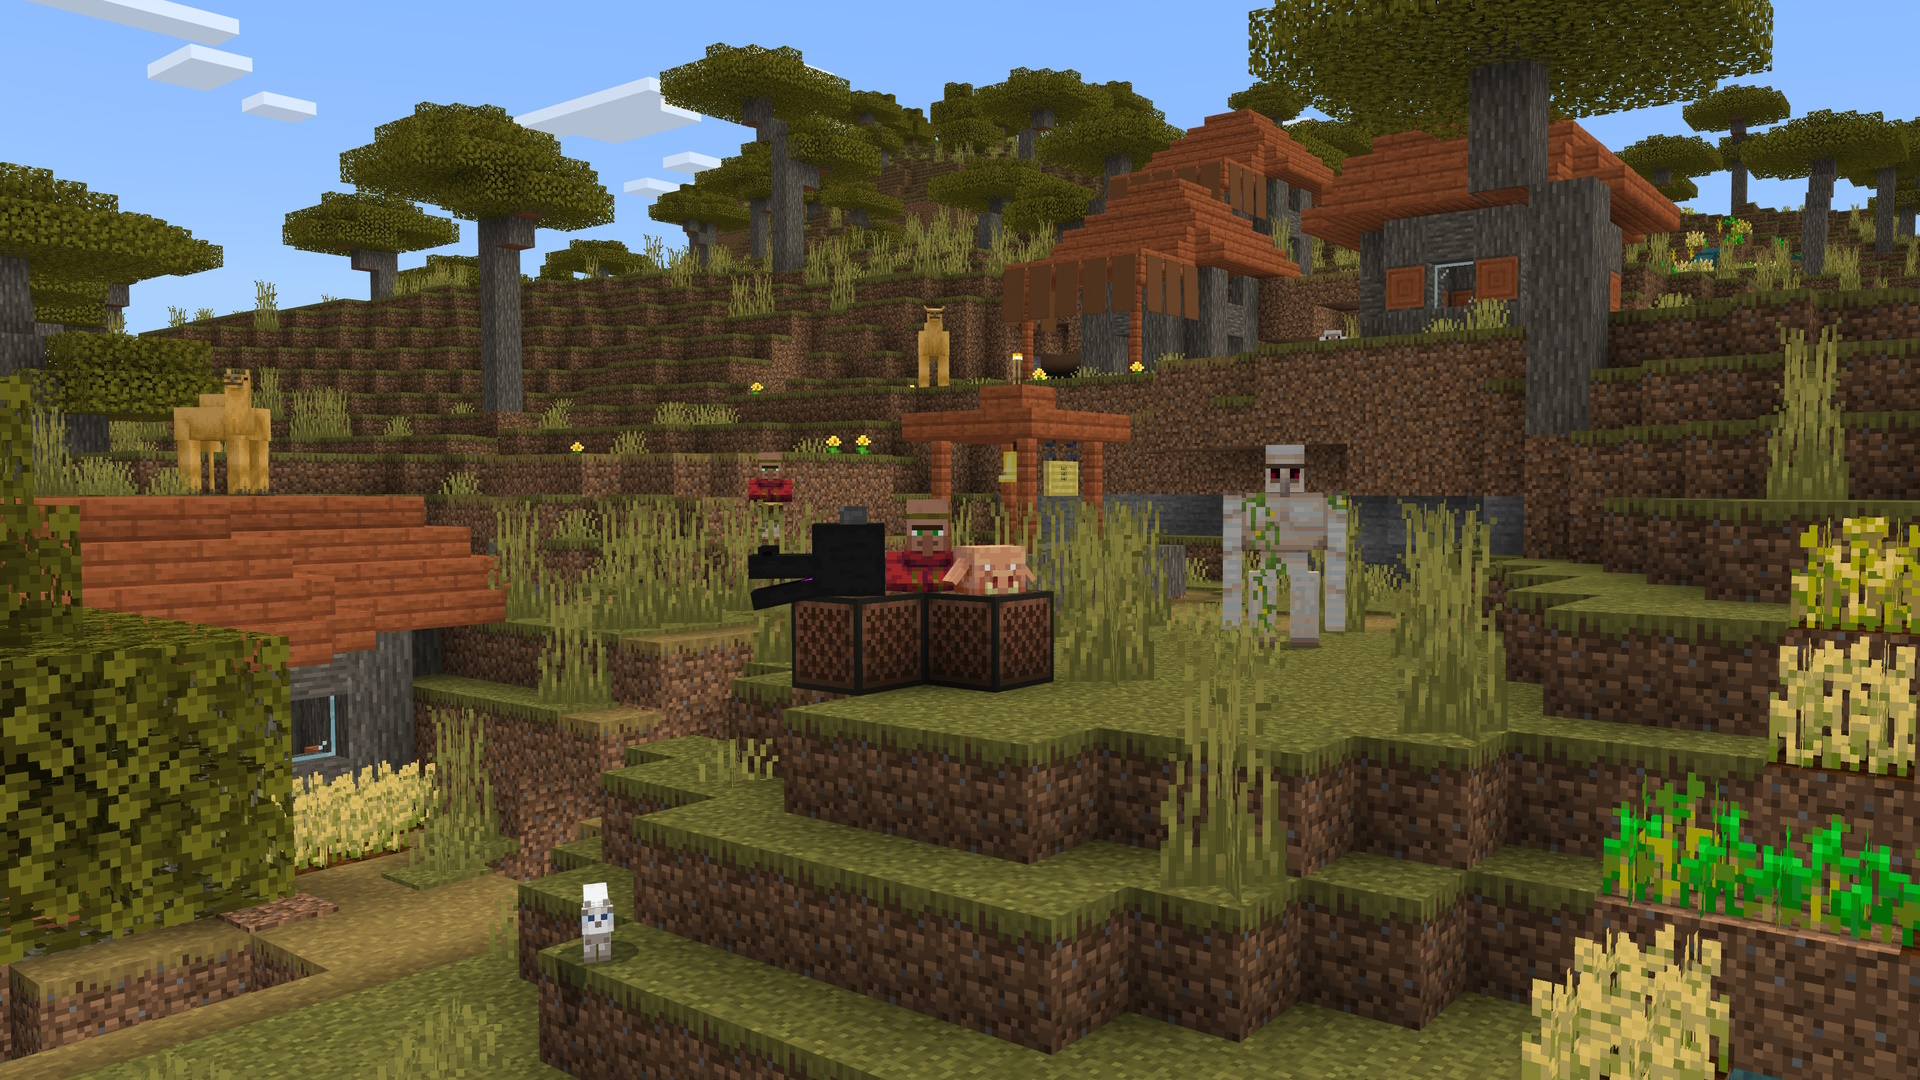 A Minecraft screenshot of a village, featuring a villager standing by two noteblocks with a dragon and a piglin head on top. There is an iron golem, two camels, and a cat in the scene also.
